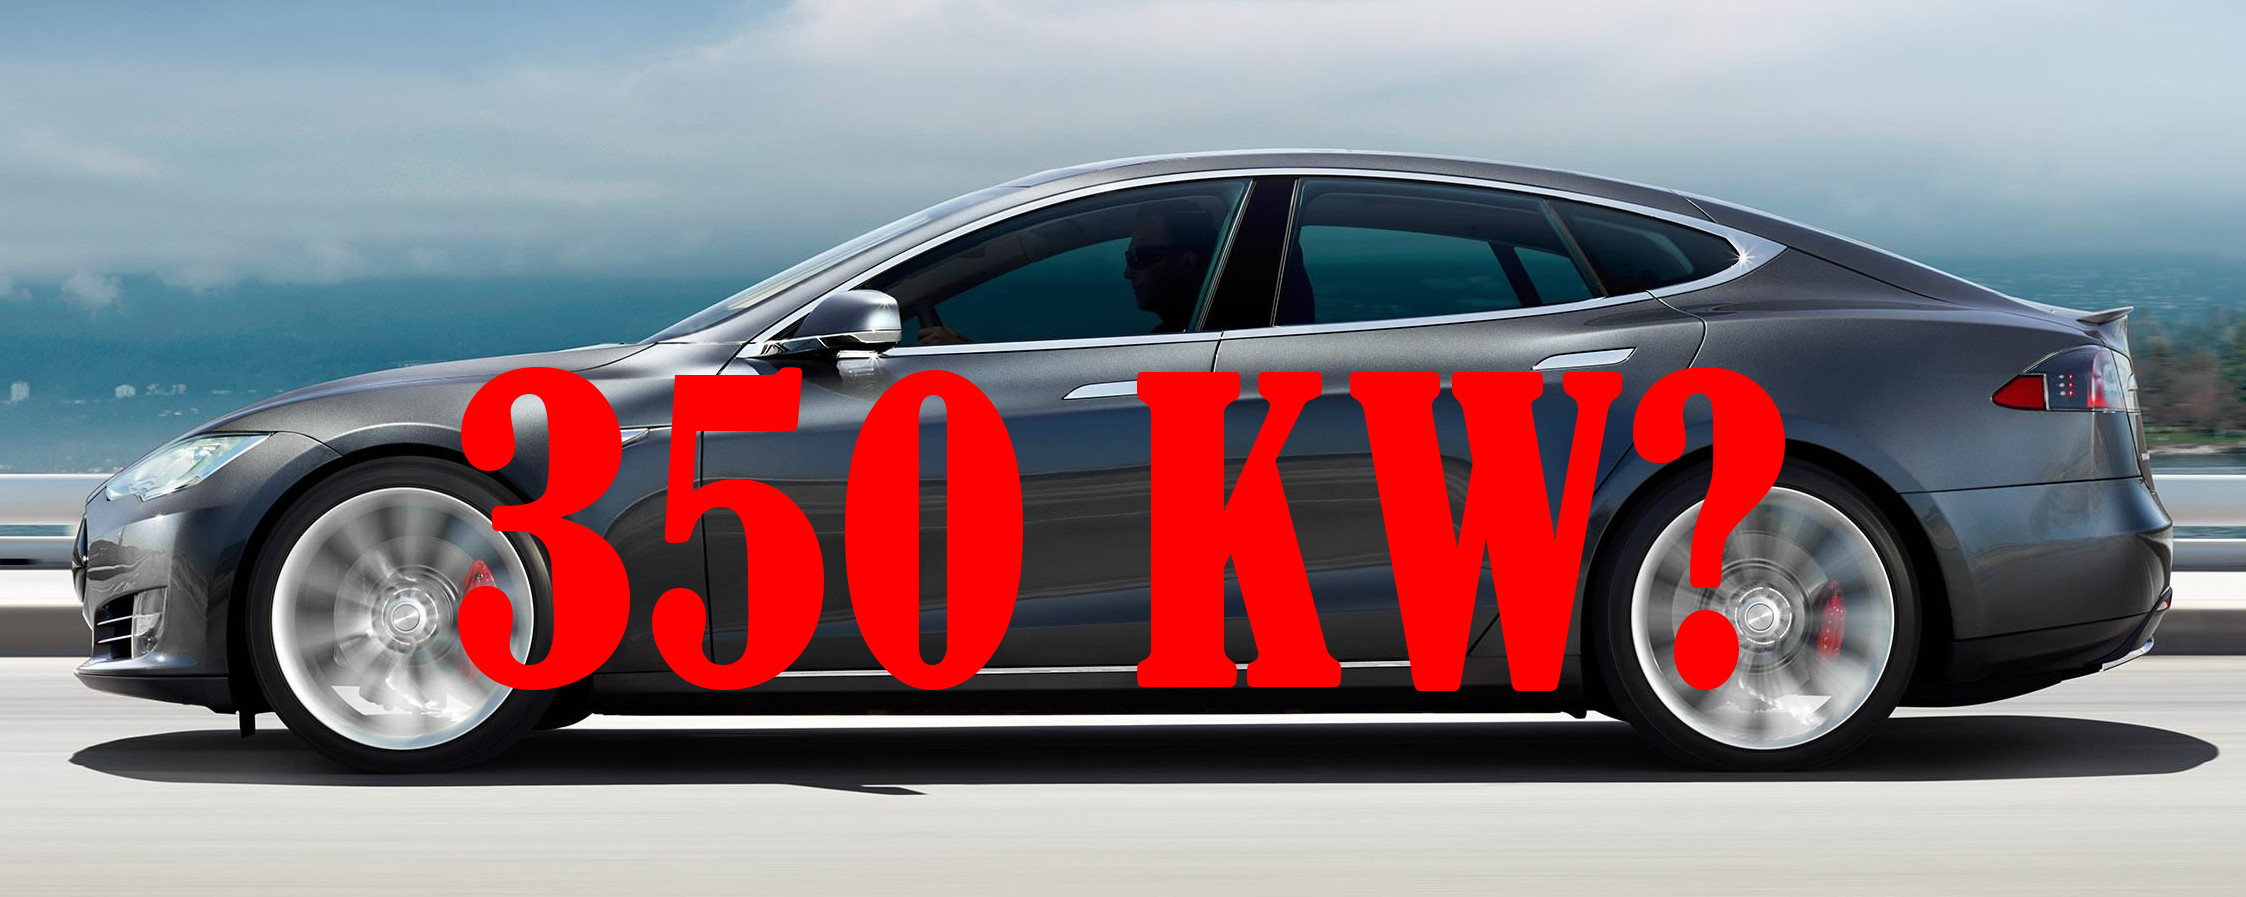 Charging a Tesla S/X at 350kW: Plausible!